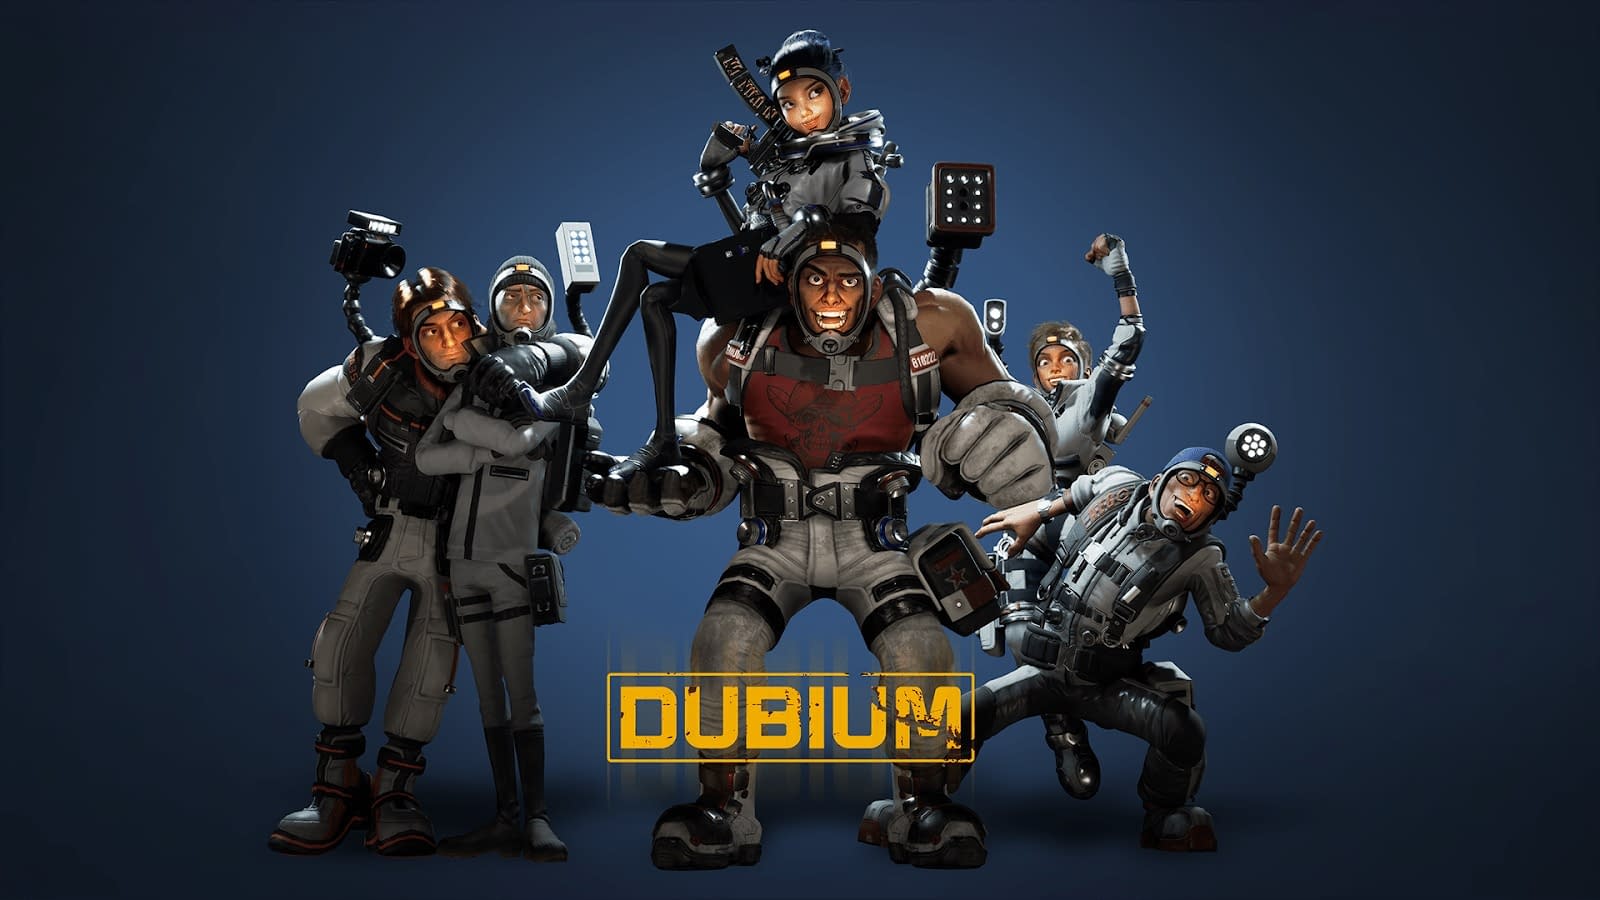 Science fiction comes from themed online survival game: DUBIUM